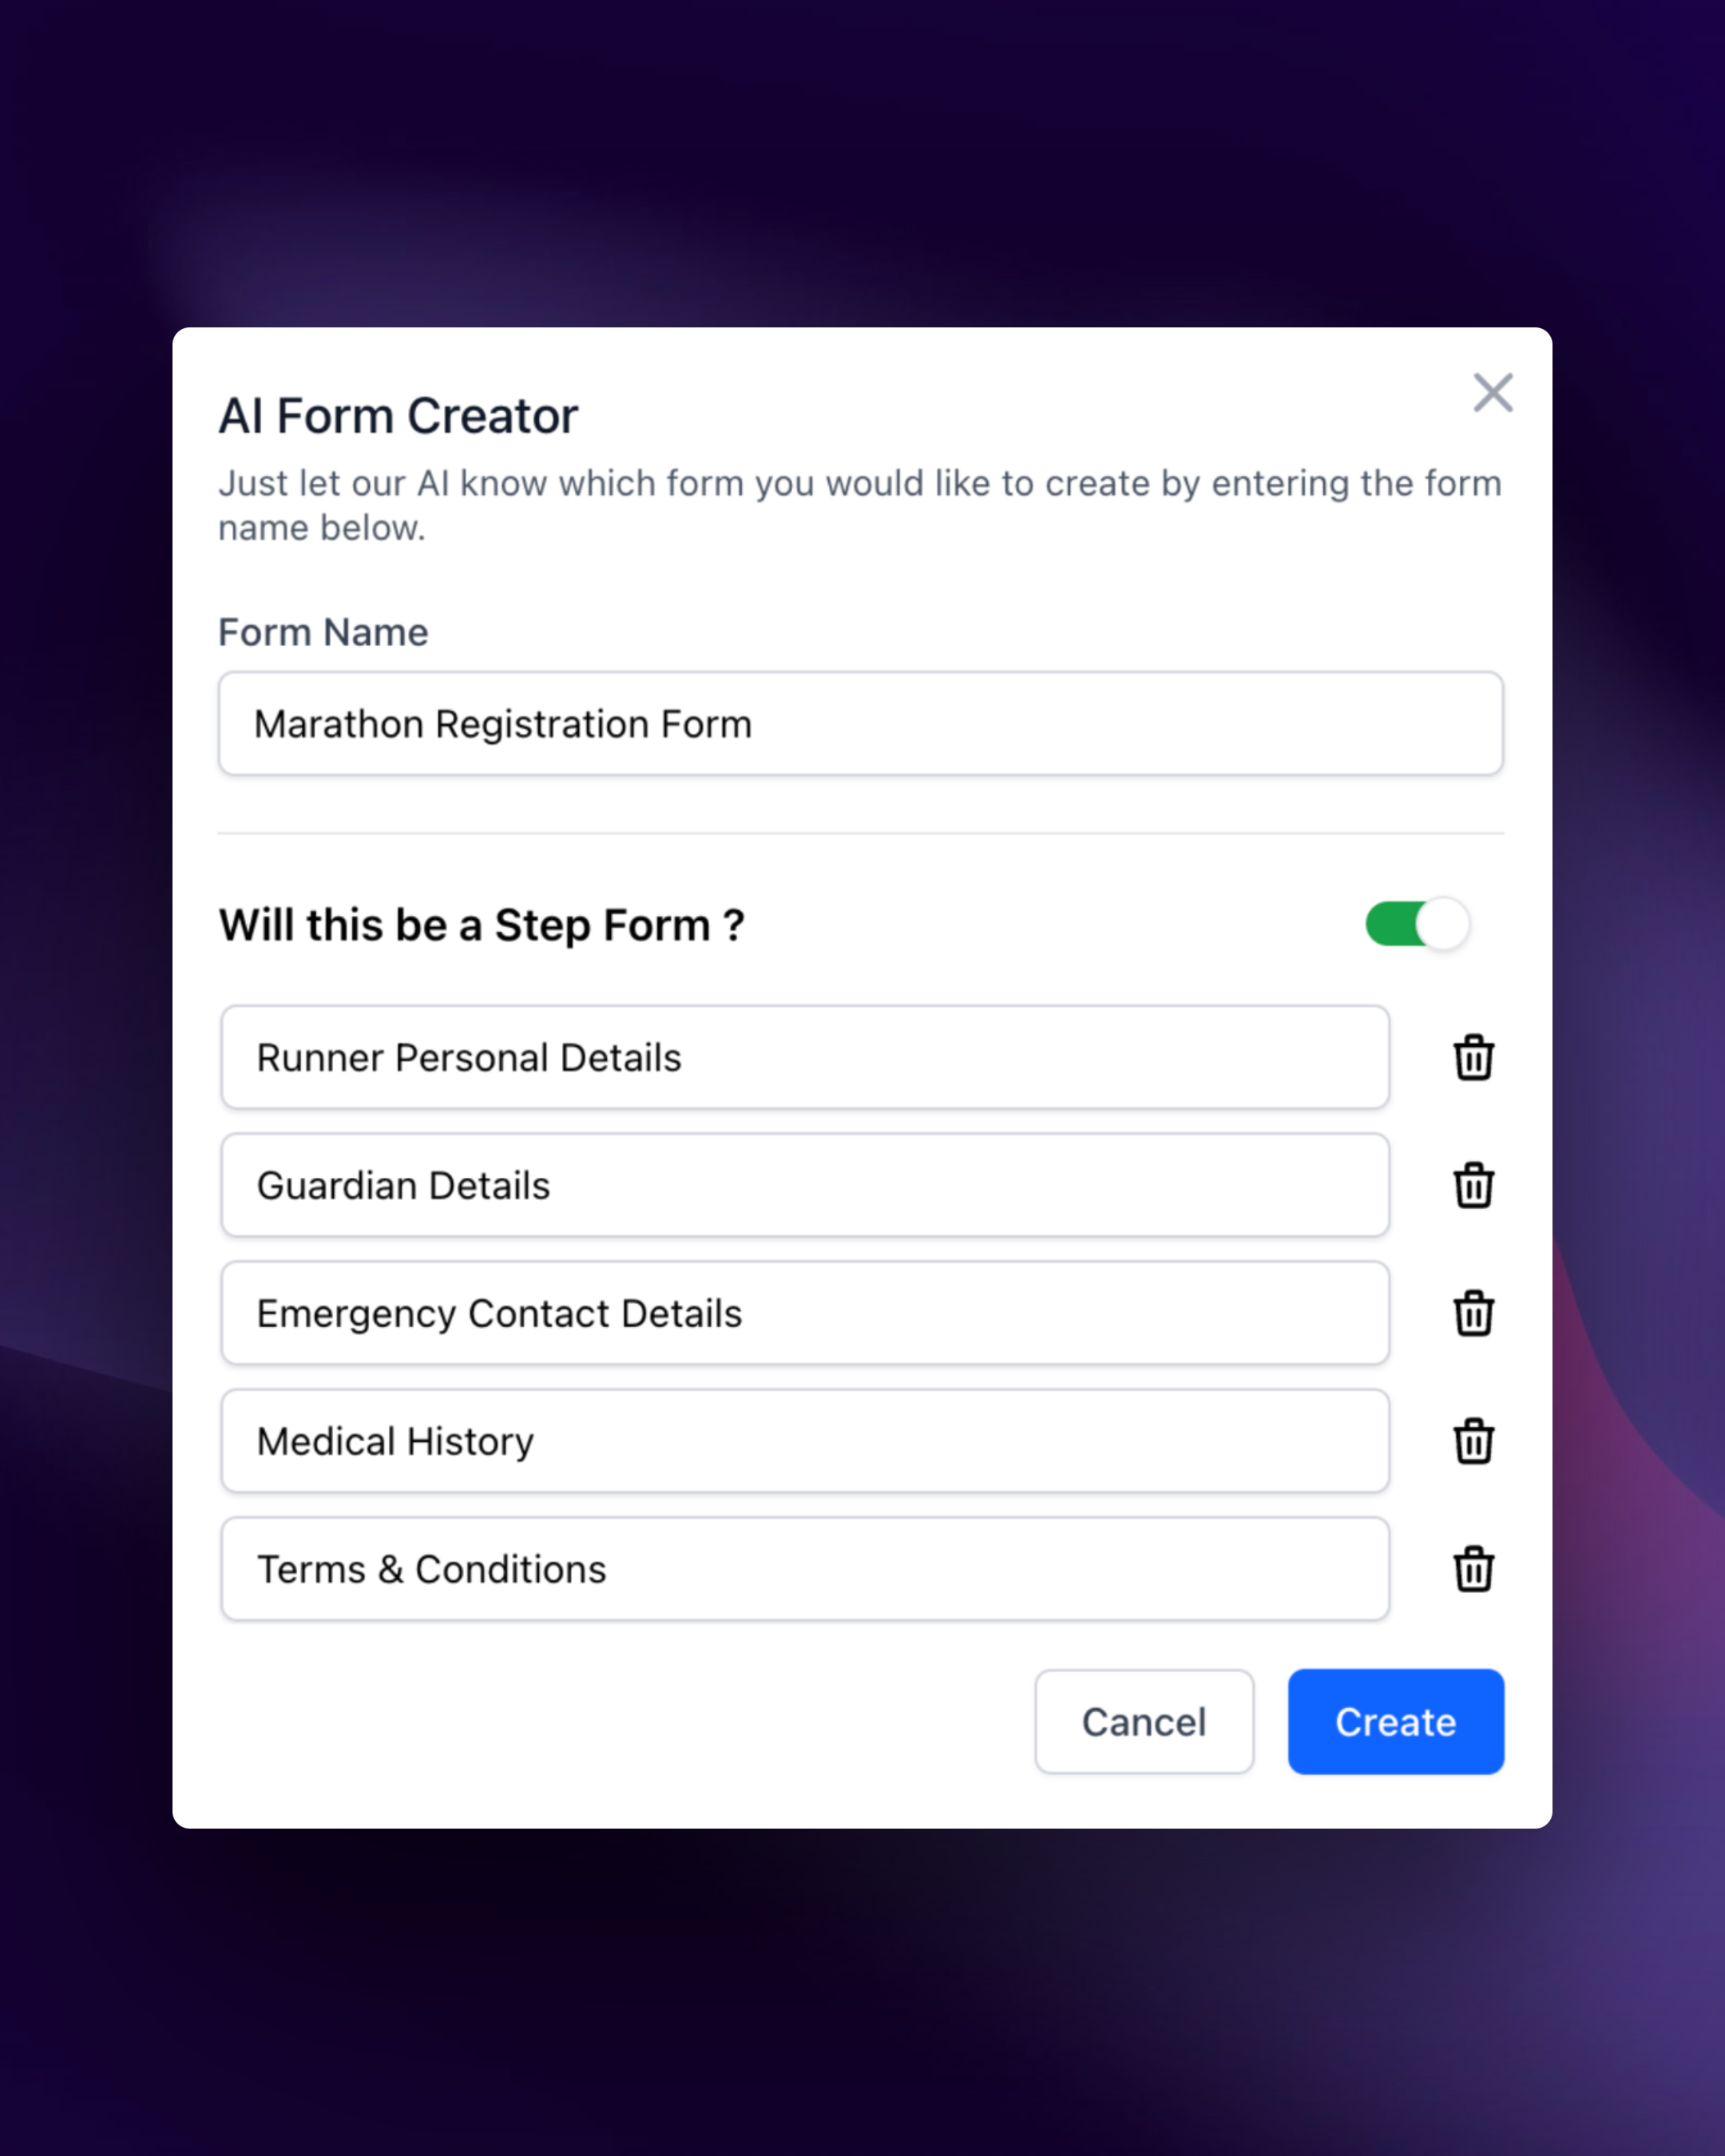 MakeForms - A platform to create, share, and track forms securely